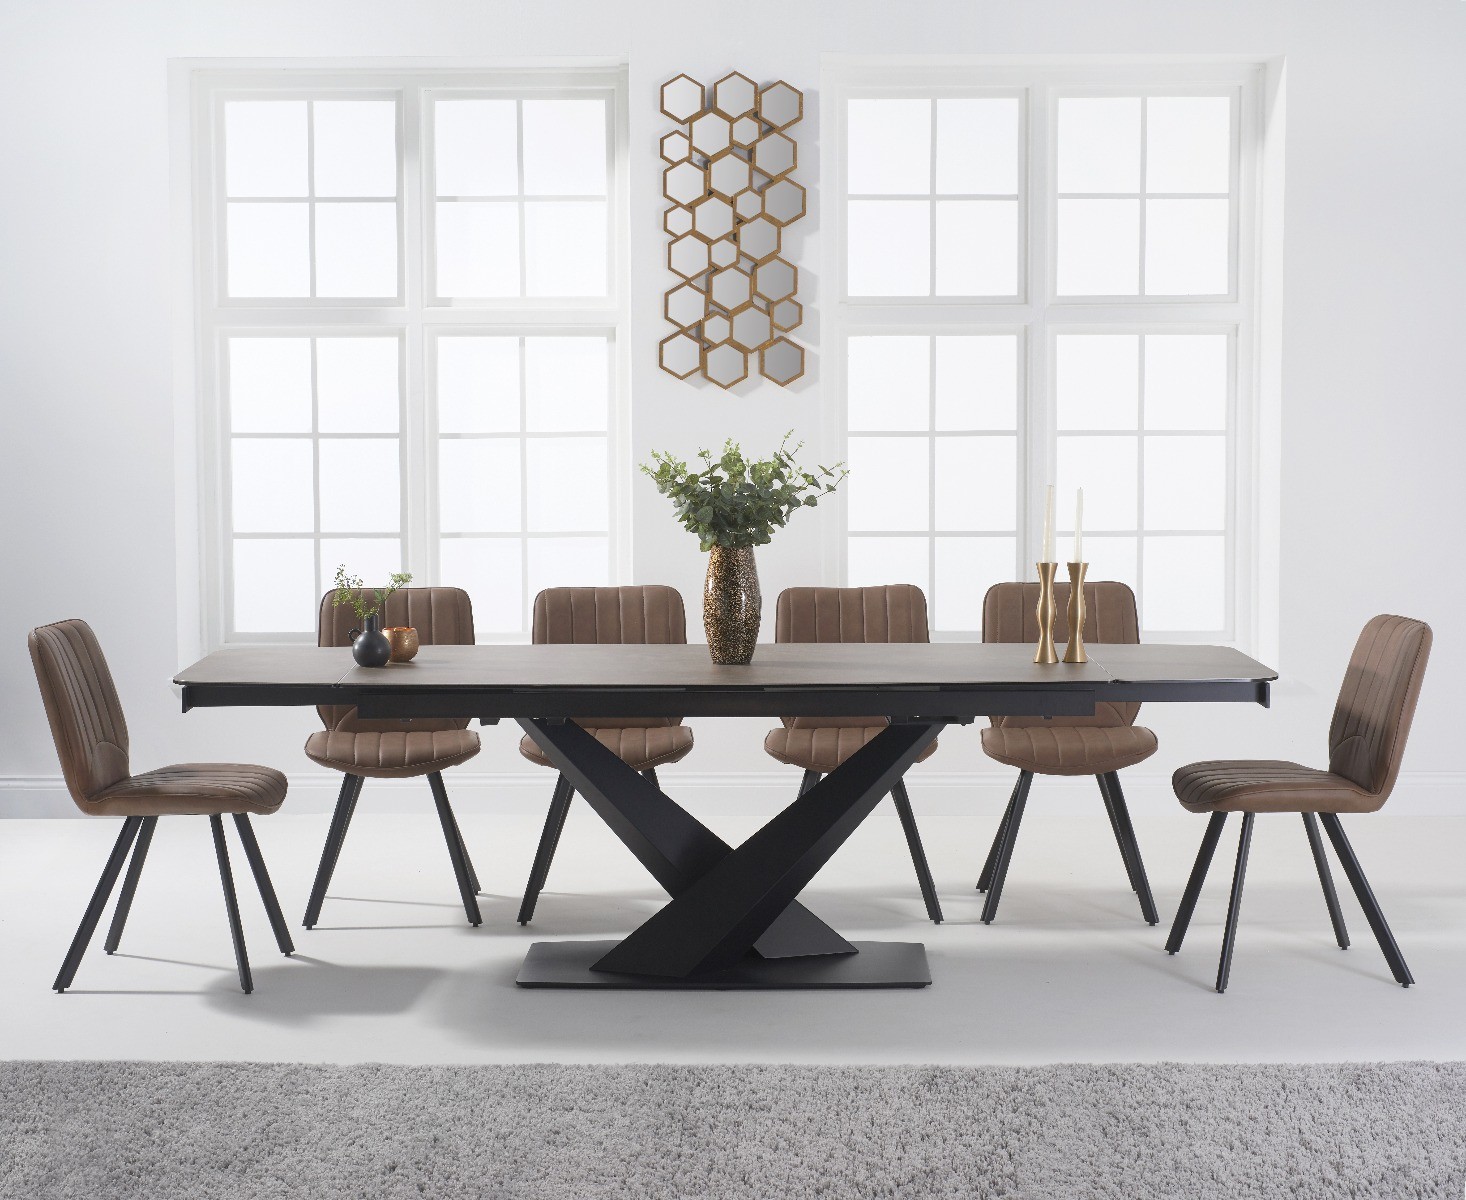 Extending Jacob 180cm Mink Ceramic Dining Table With 6 Brown Hendrick Chairs